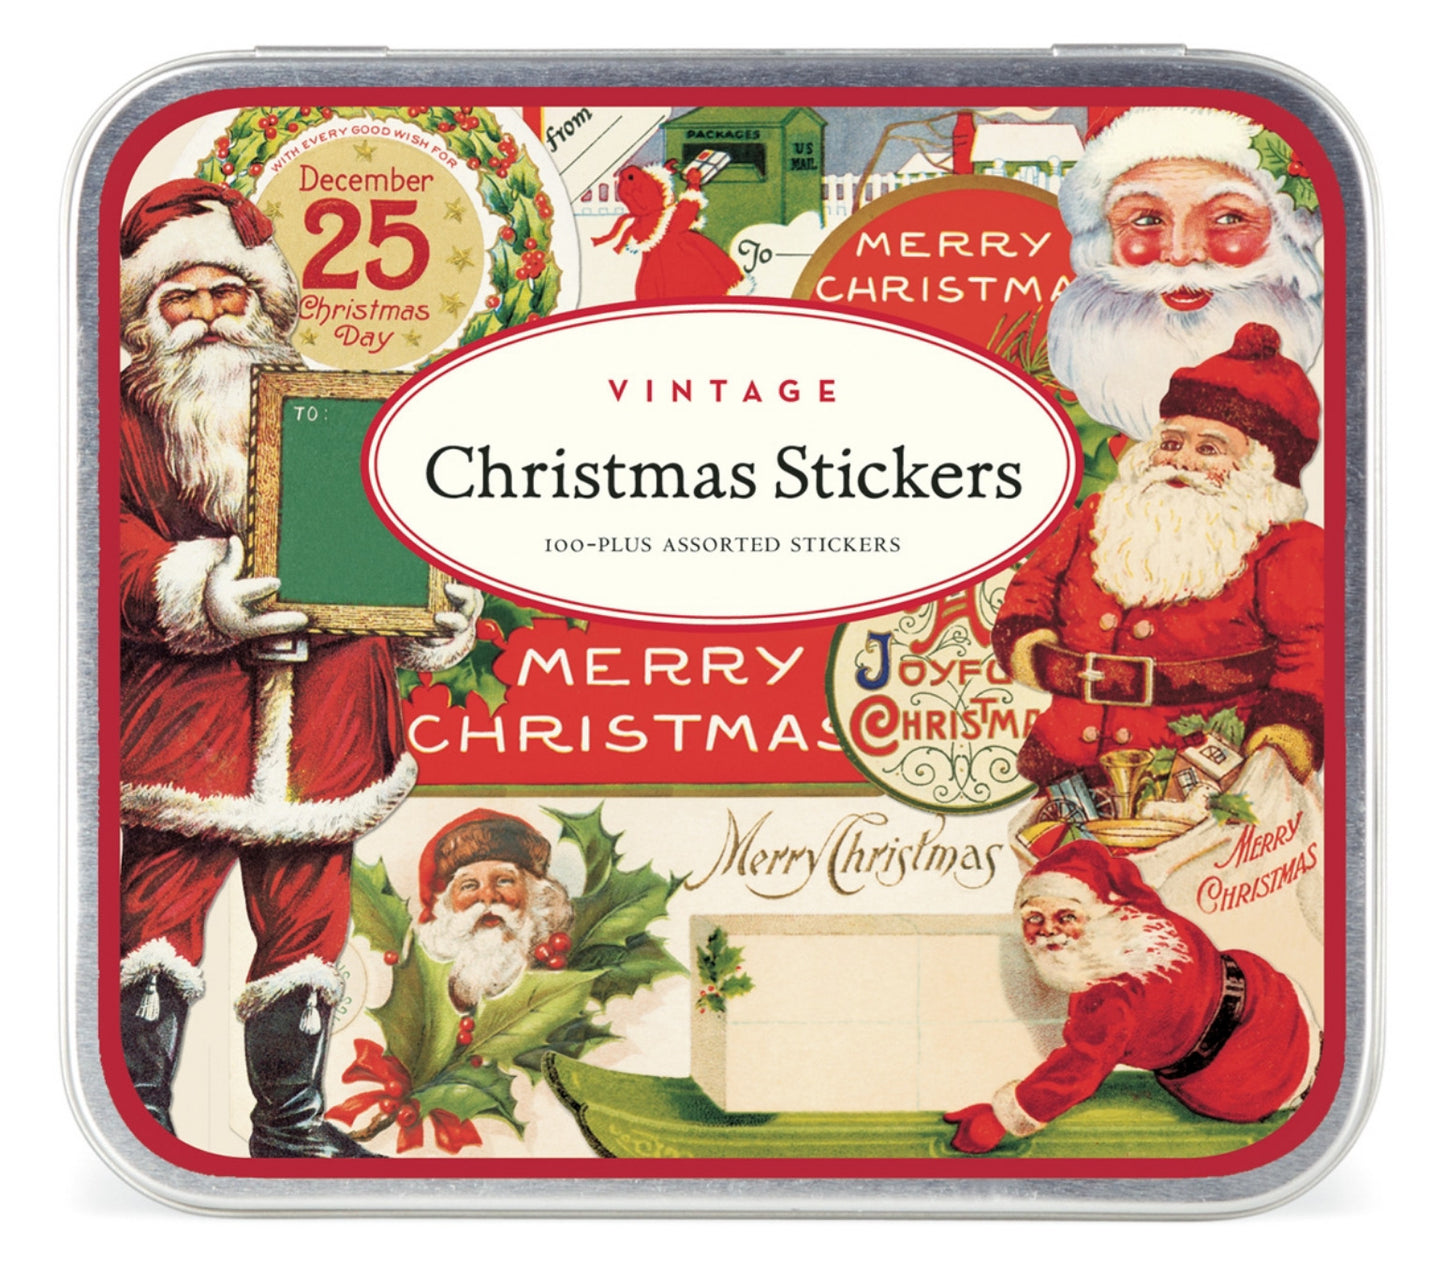 100+ Vintage-Style Christmas Stickers in Metal Tin - A